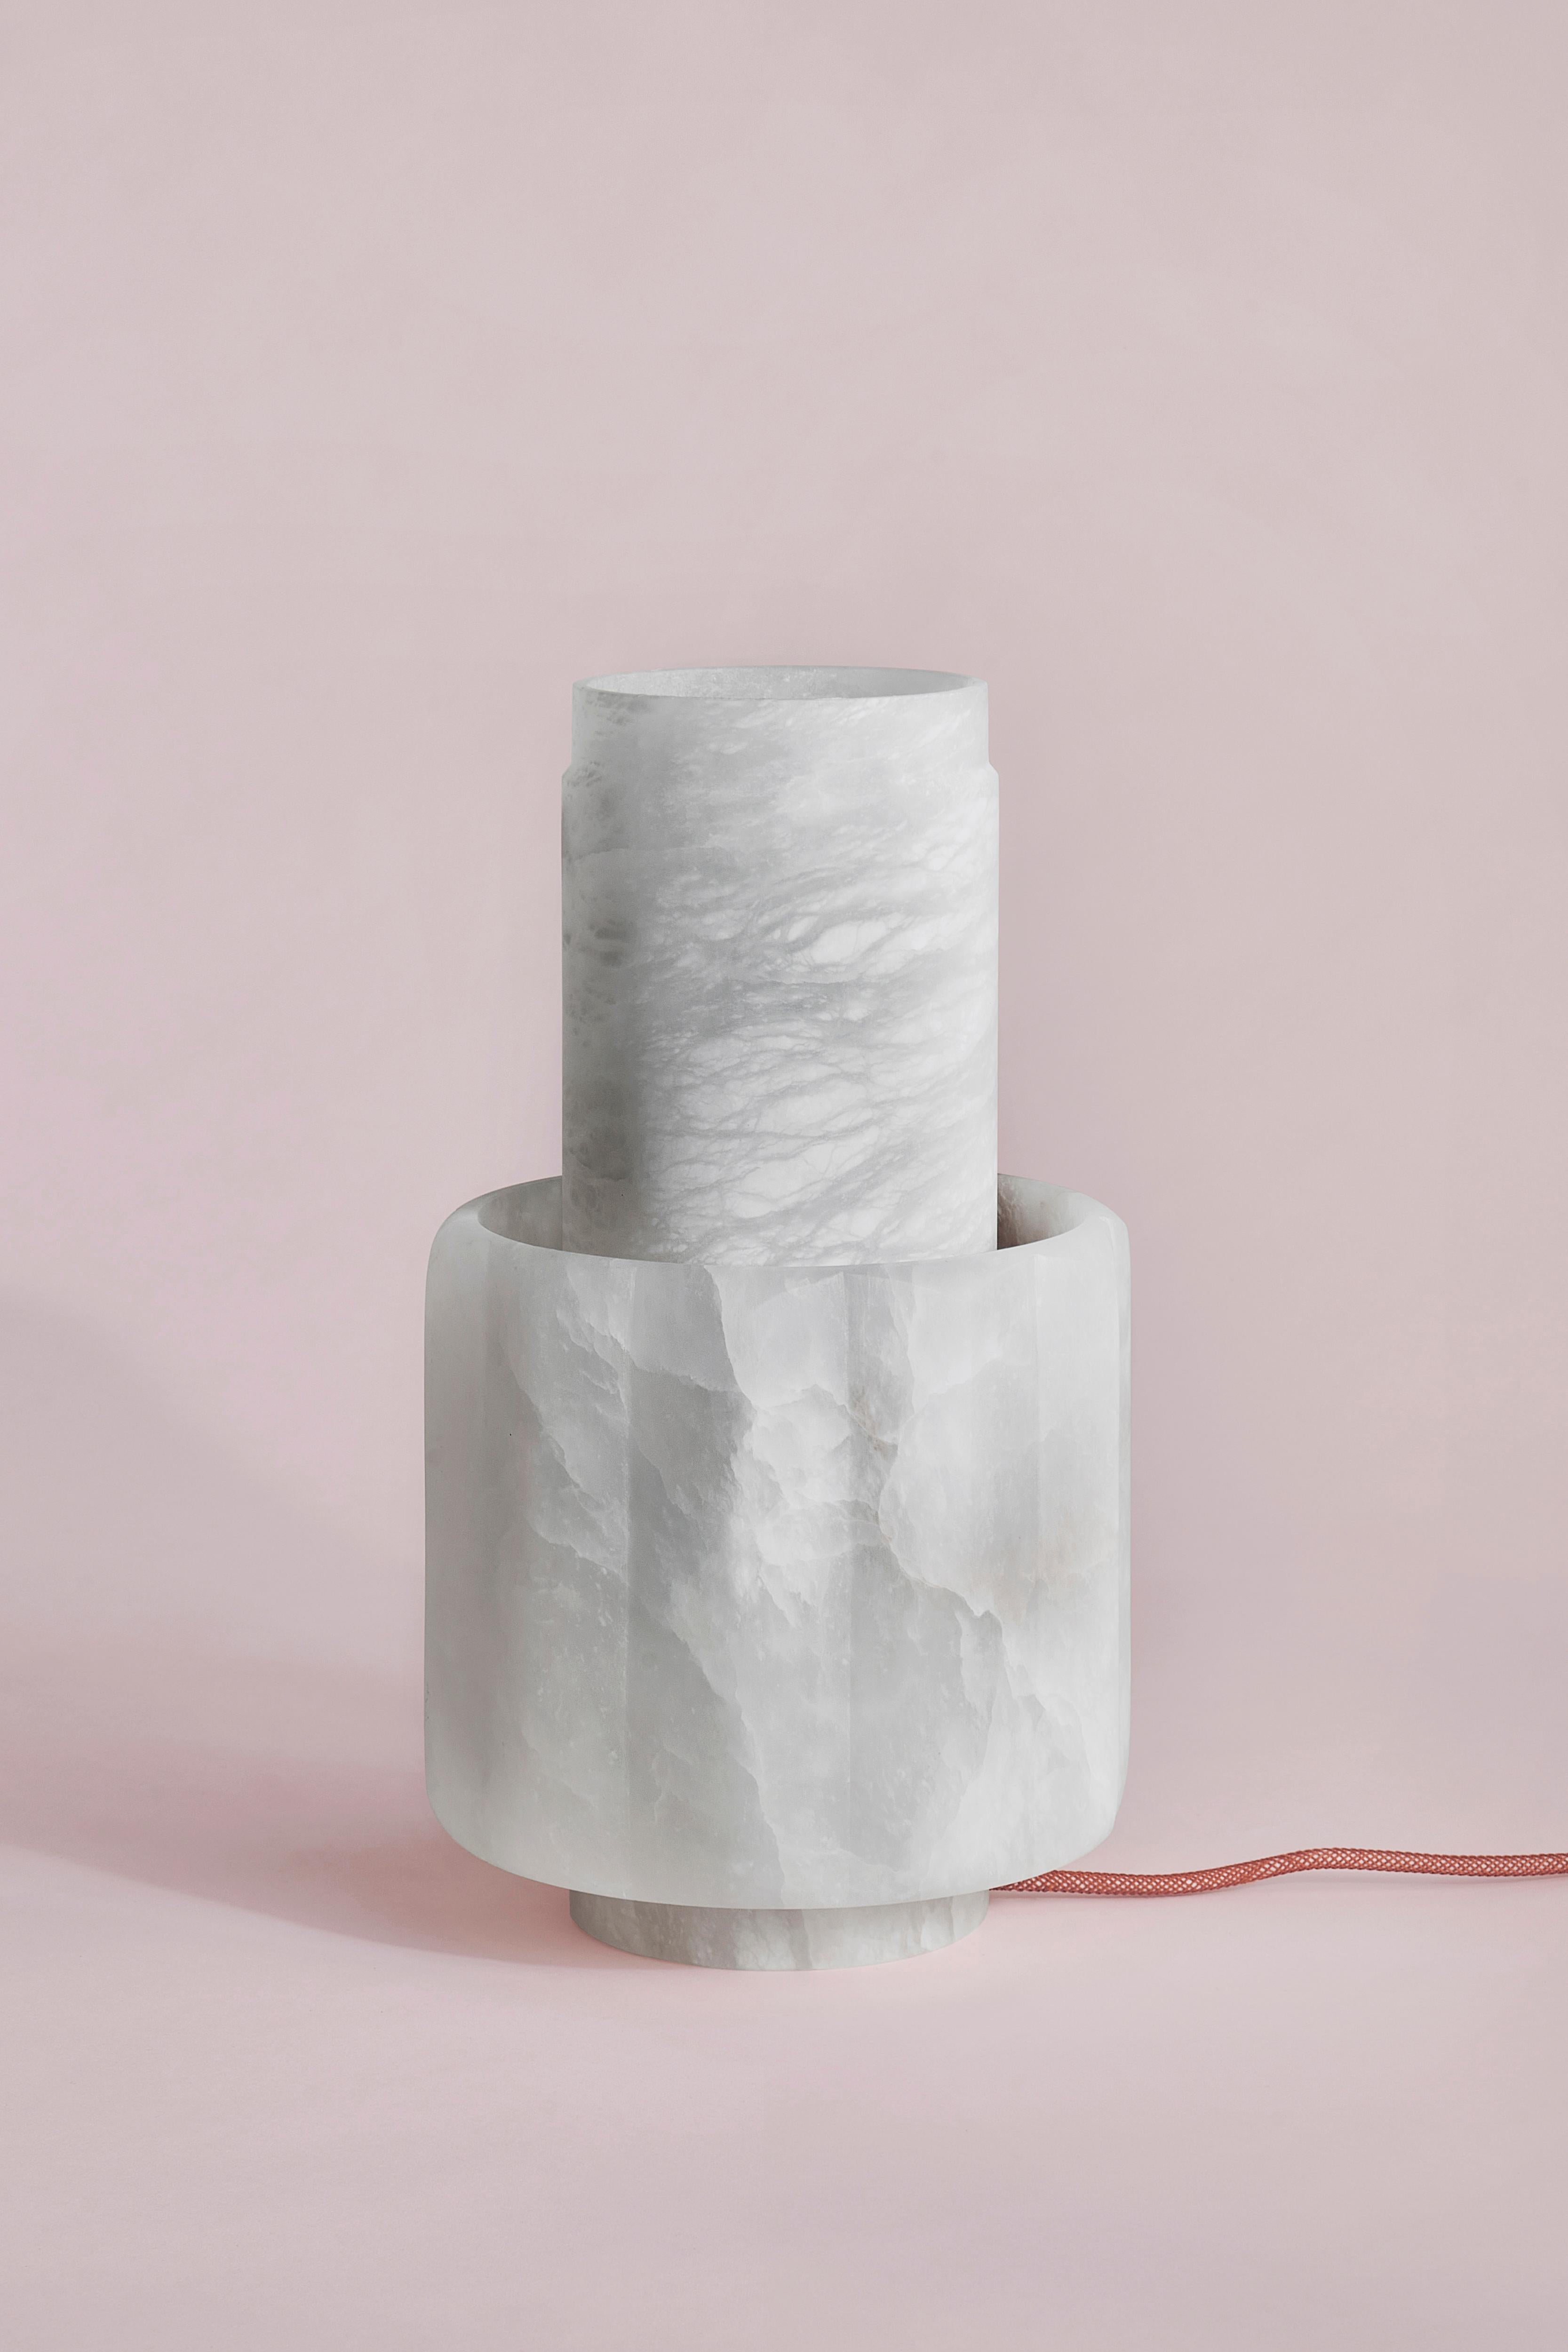 Bowl Table Lamp by SB26
Dimensions: W 38 x D 38 x H 21 cm
Materials: Alabaster, LED Source.

In a consistently geometric vocabulary, this family of lamps unveils the
translucent and organic nature of alabaster.
A contrast of shapes and